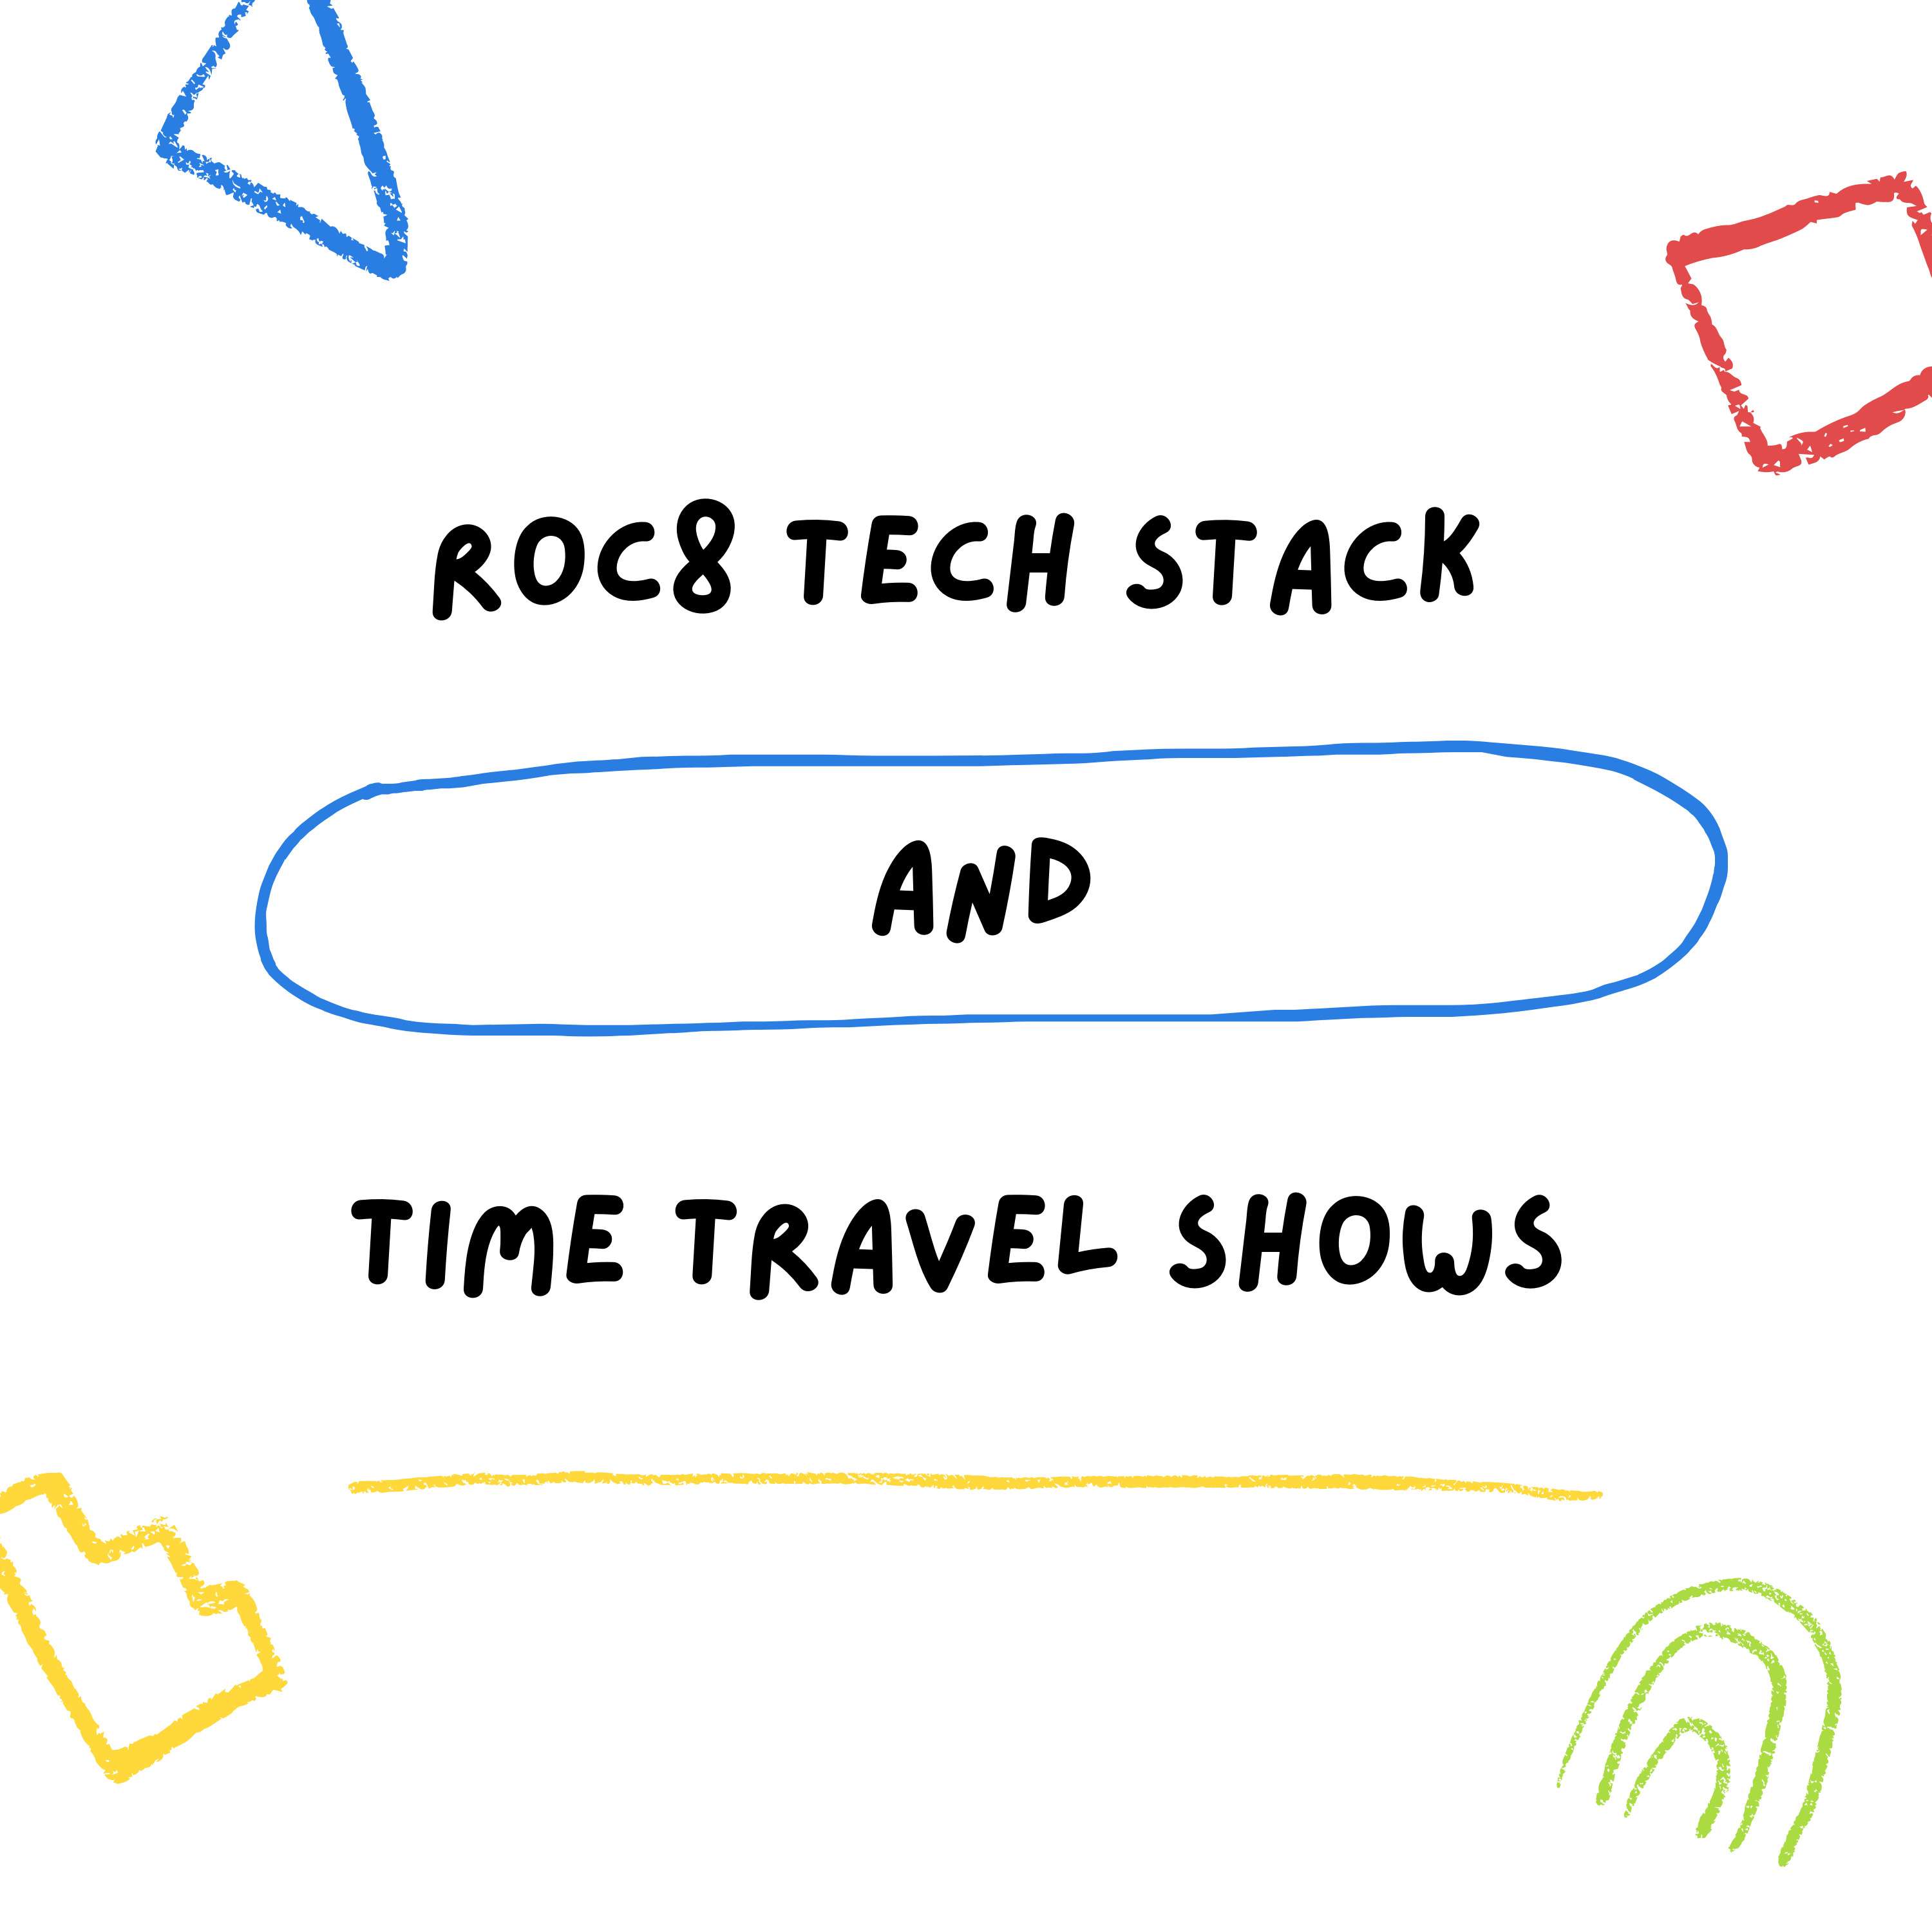 Roc8 Tech Stack and Time Travel Shows